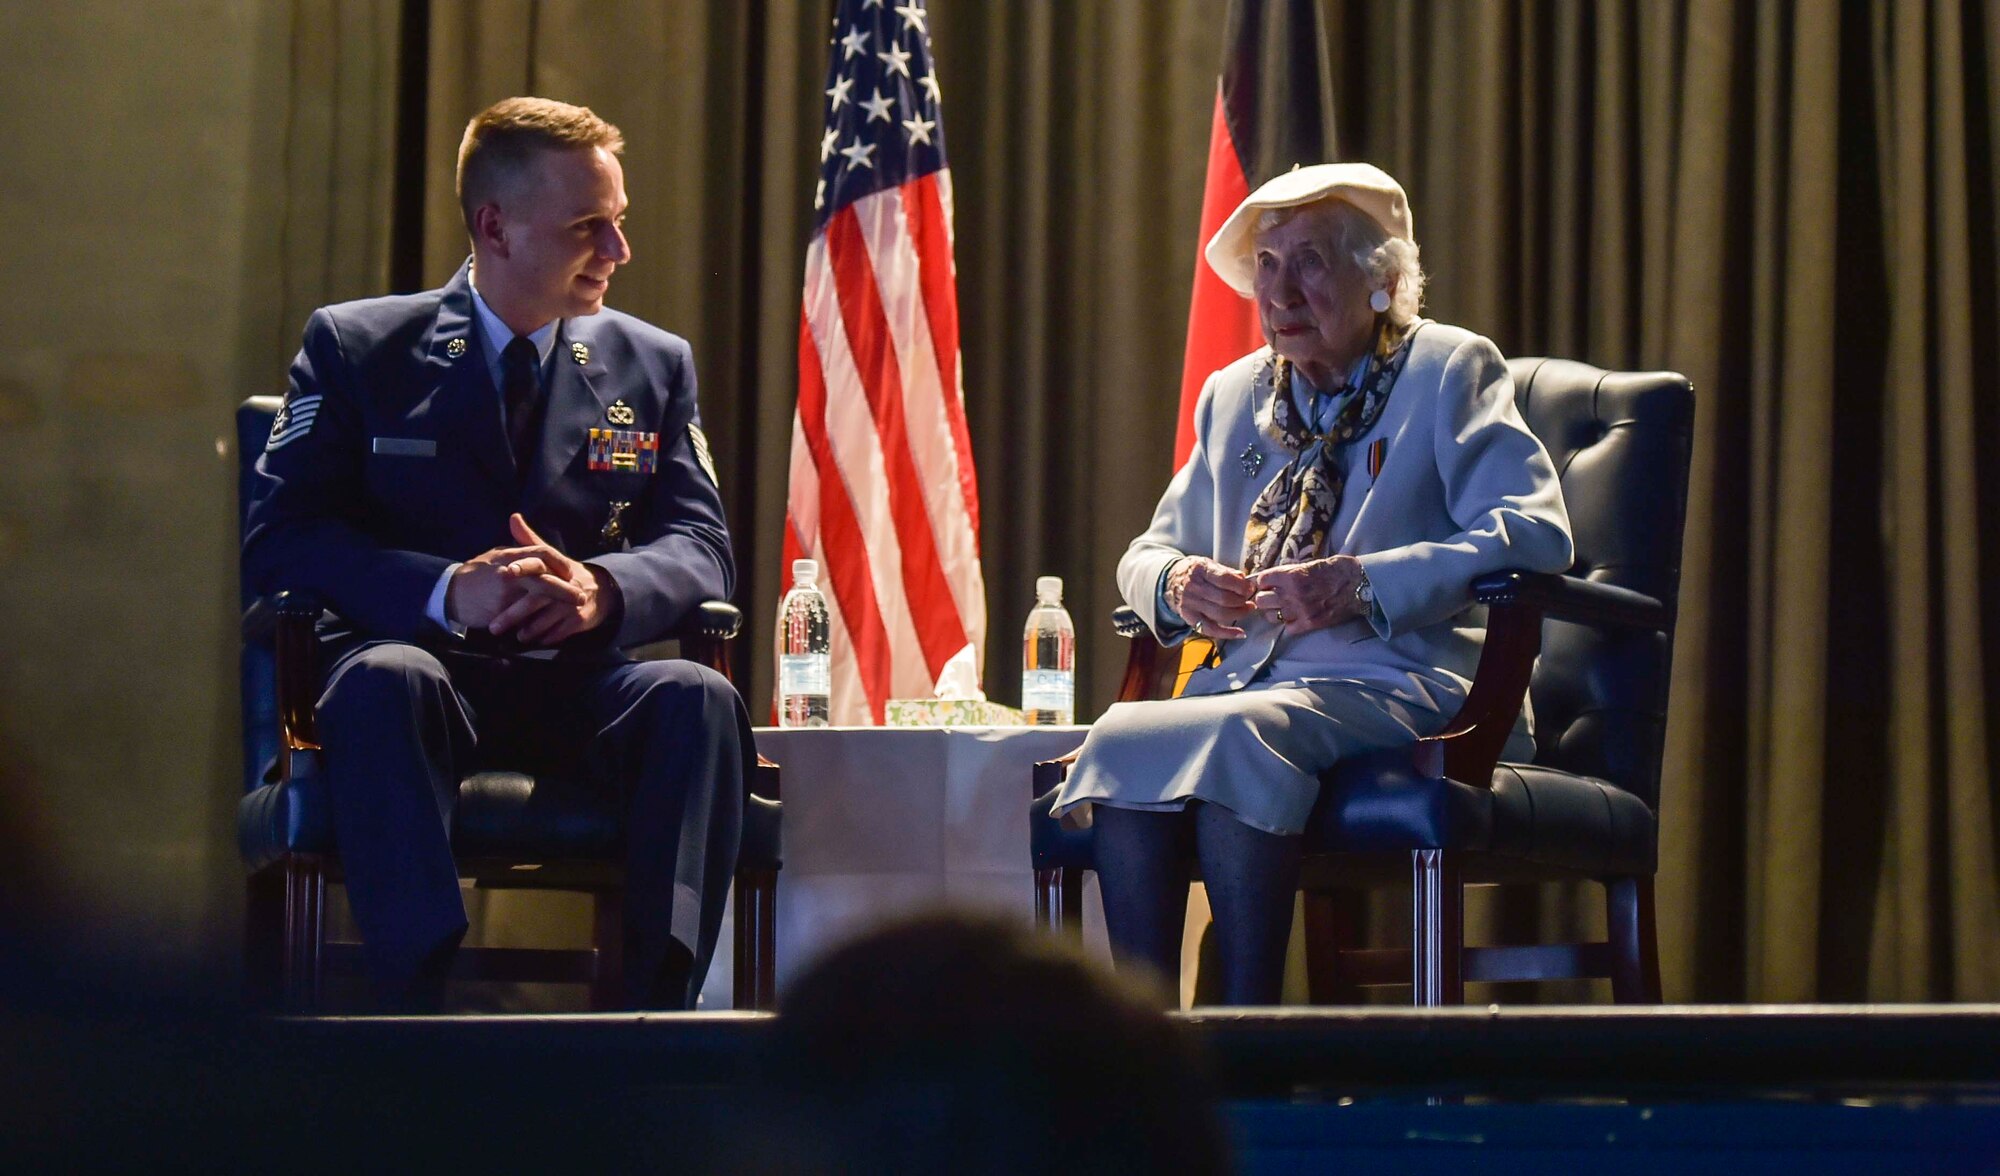 Ms. Selma Van de Perre, 92-year-old Holocaust survivor, sits with Tech Sgt. Robert Jarvis, 86th Civil Engineer Squadron fire fighter, during a Holocaust remembrance event held at Ramstein Air Base, Germany May 6, 2016. Van de Perre shared her story of surviving Ravensbrück, a women’s concentration camp. (U.S. Air Force photo/Tech Sgt. Sara Keller) 